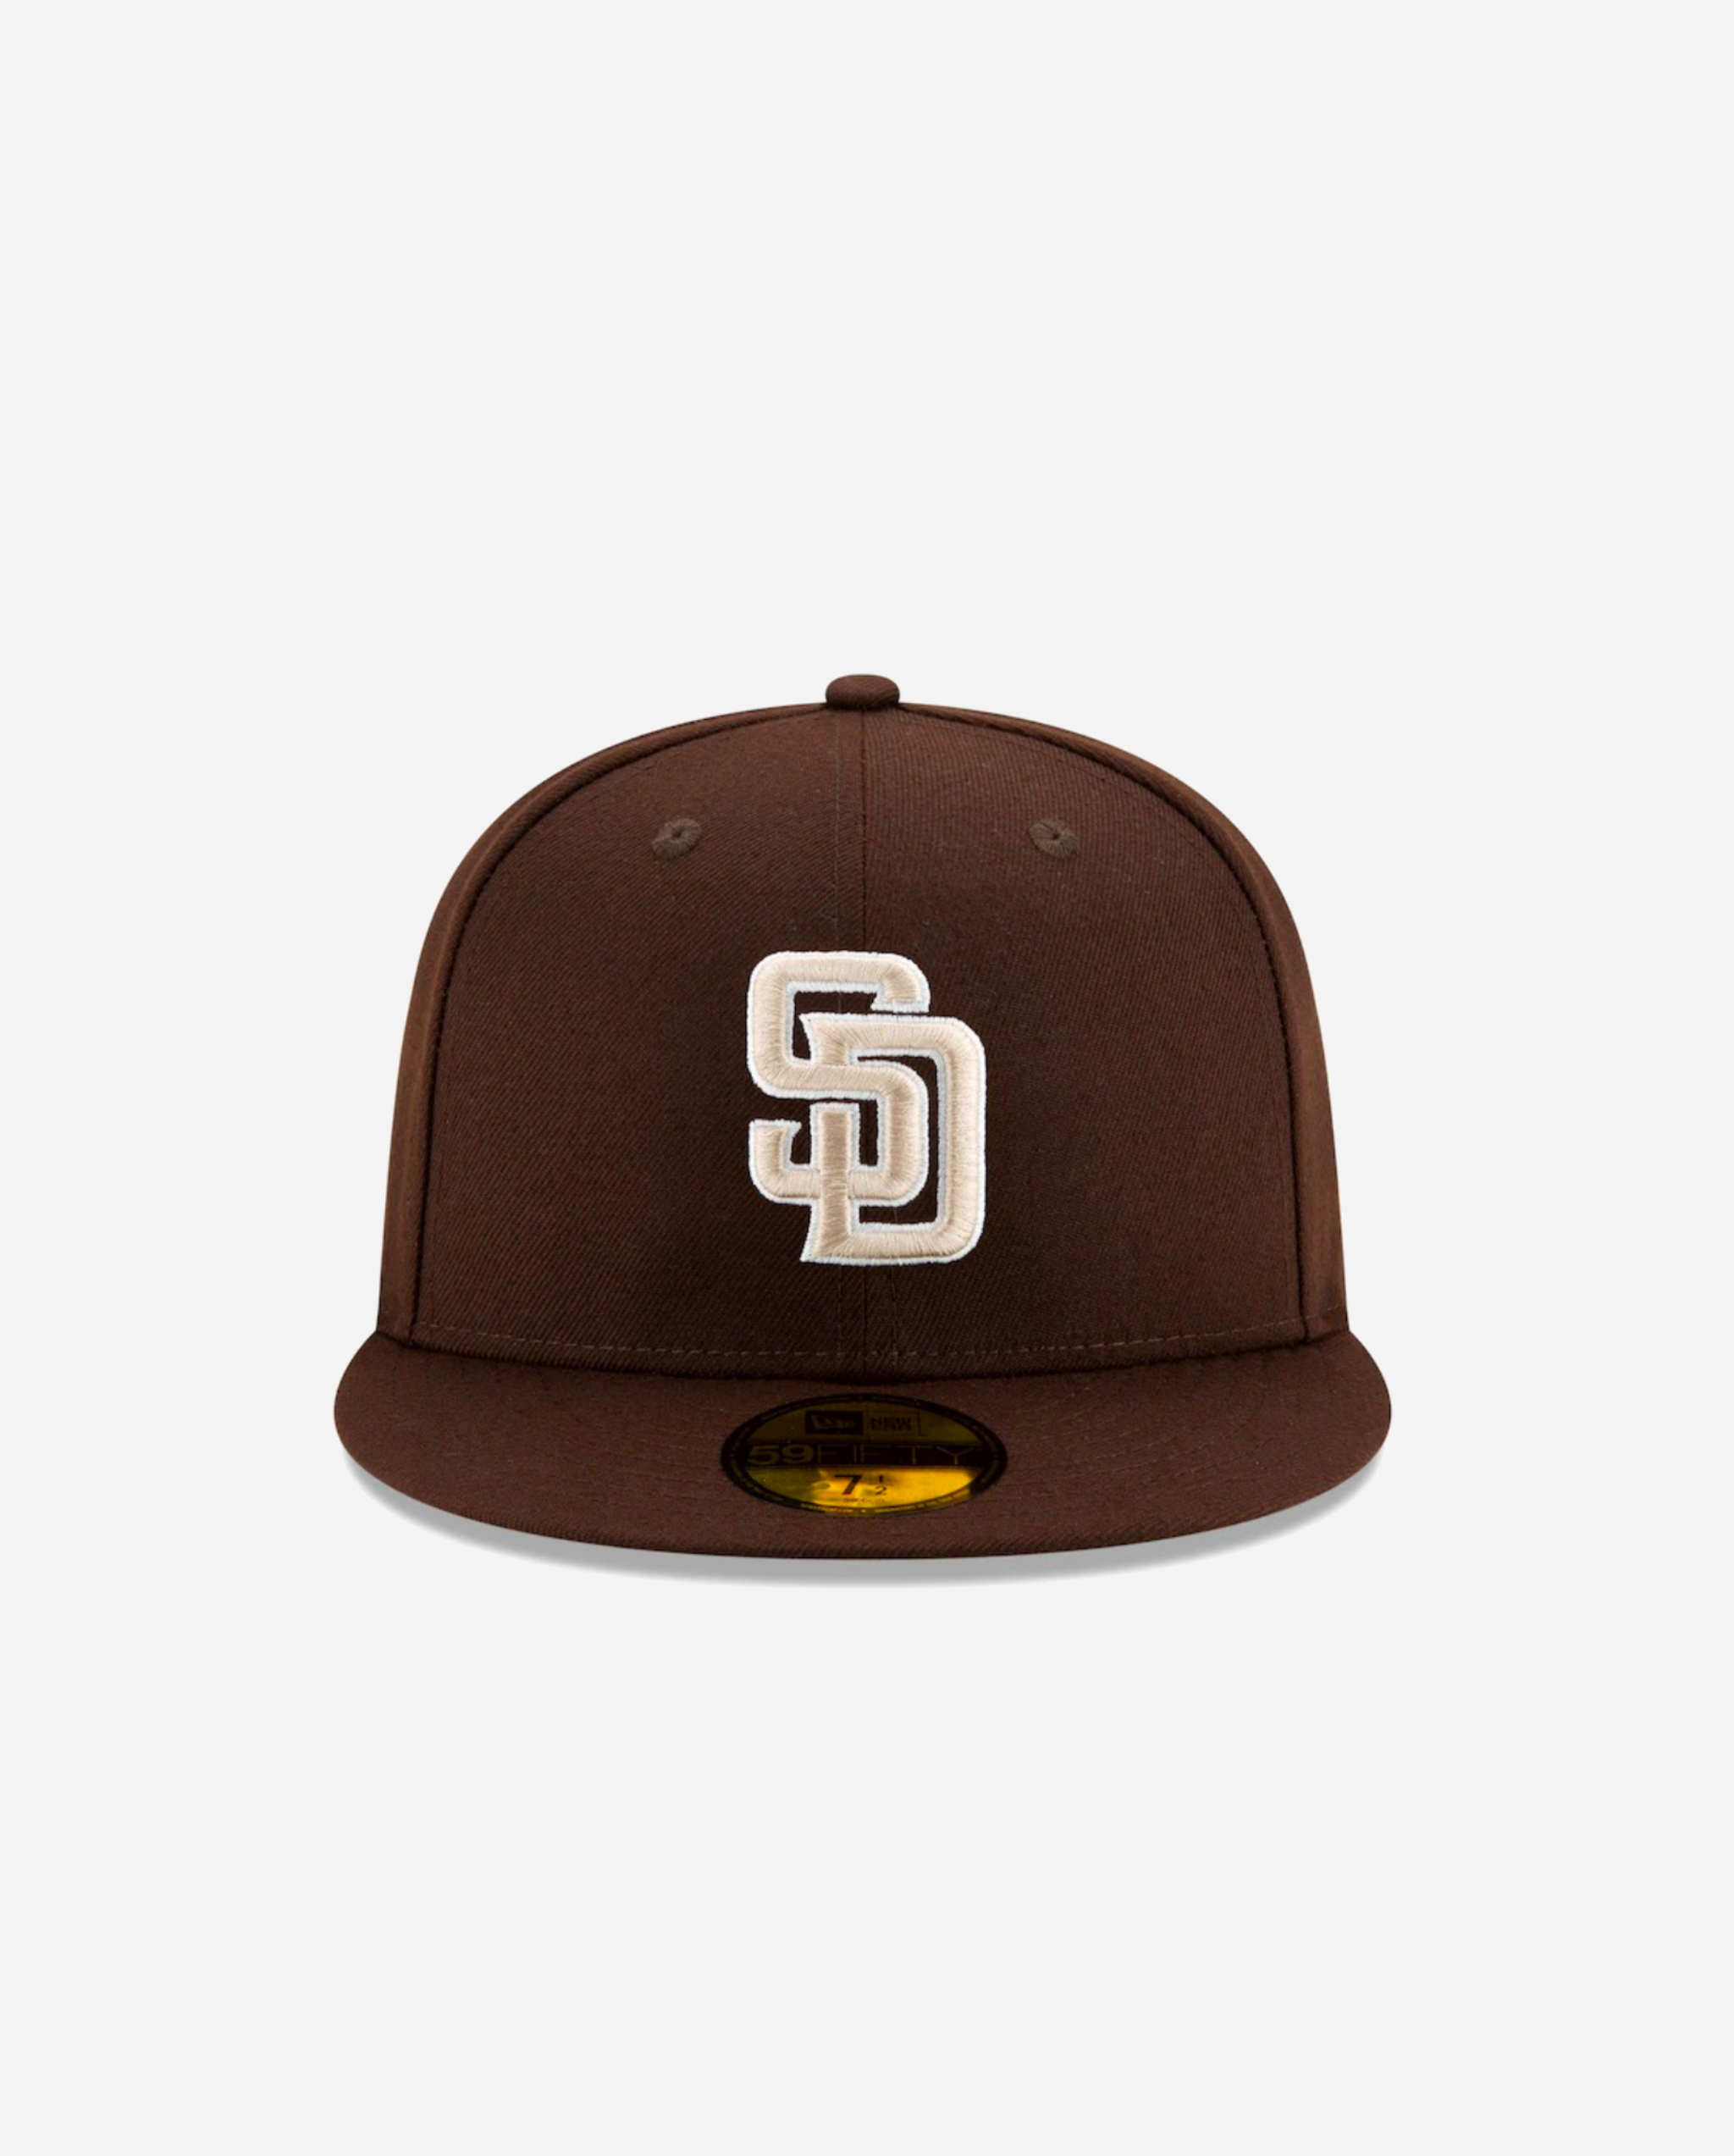 oMA SAN DIEGO PADRES LOW PROFILE FITTED HAT (SAMPLE)